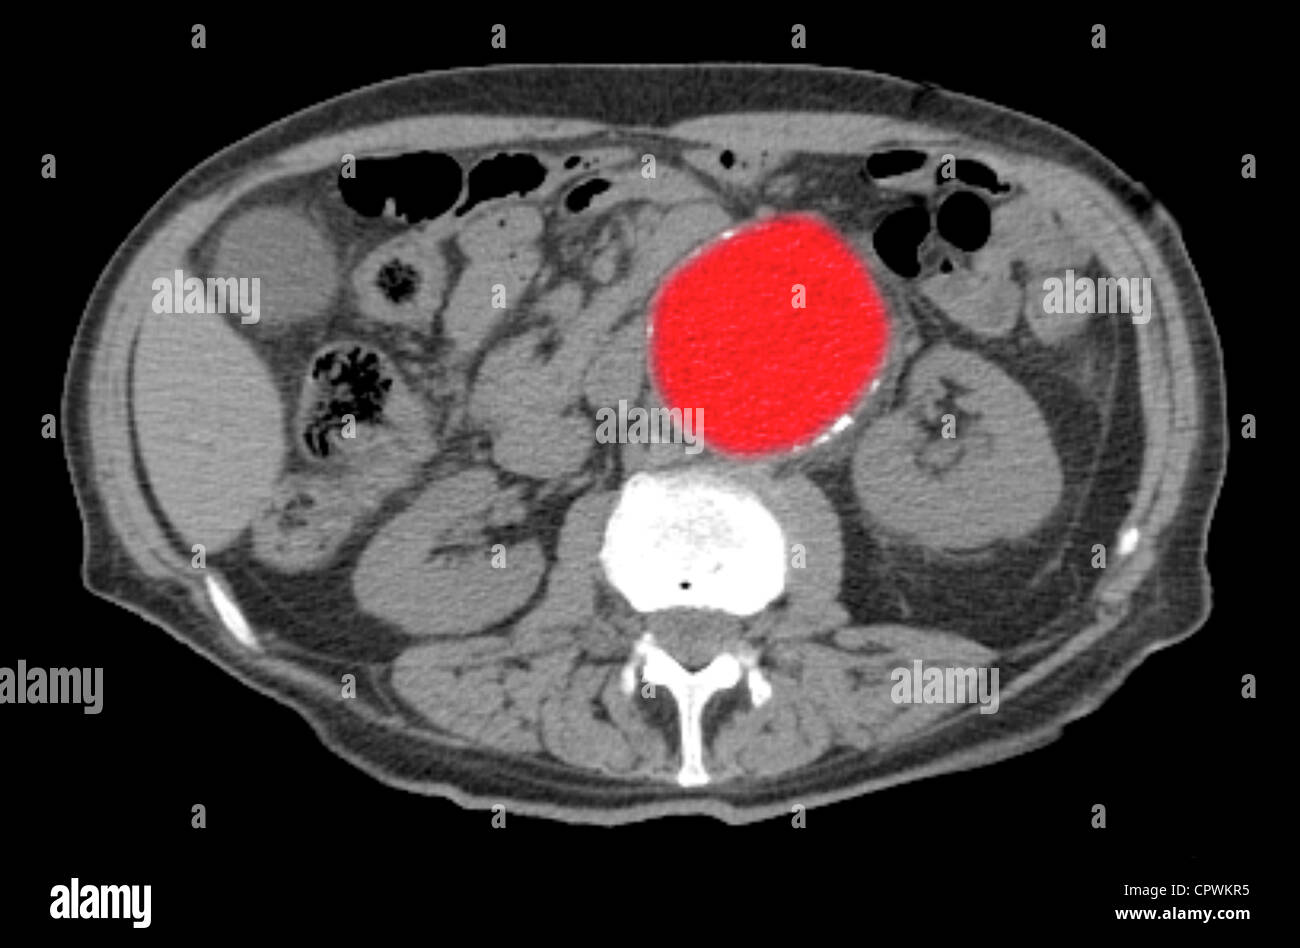 CT scan showing aortic aneurysm Stock Photo